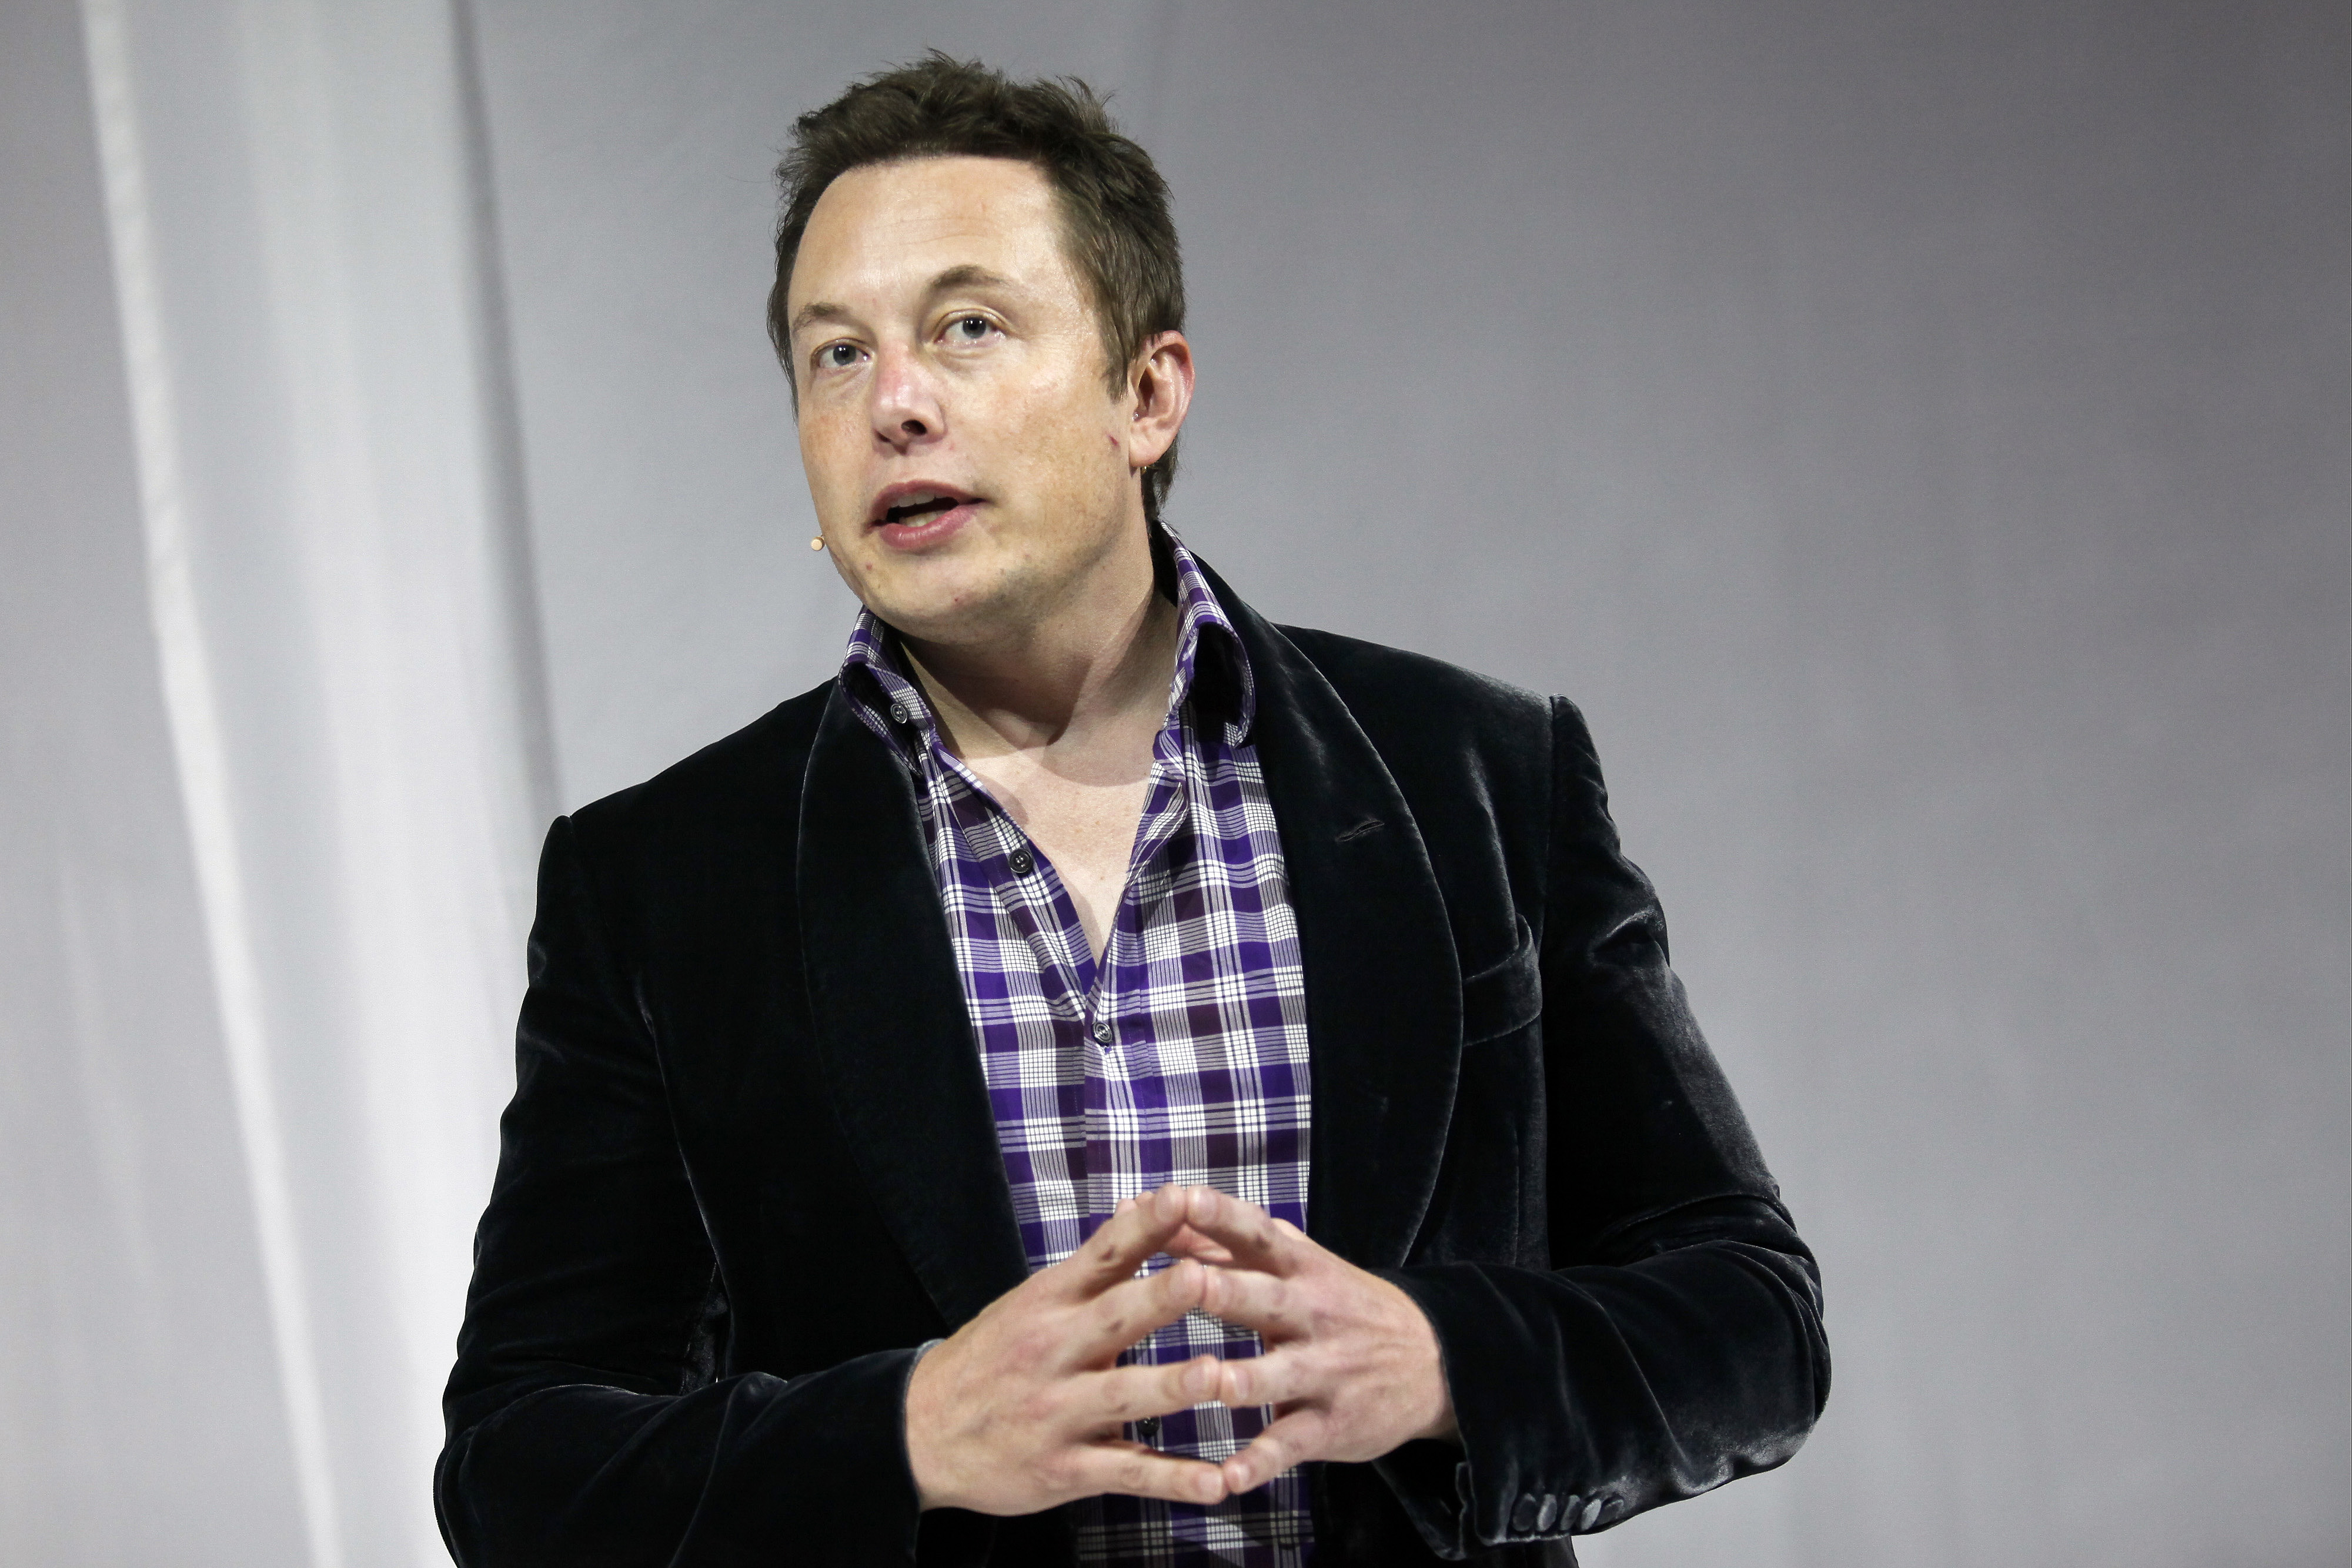 Elon Musk, chief executive officer of Space Exploration Technologies Corp. (SpaceX), speaks before the unveiling of the Manned Dragon V2 Space Taxi in Hawthorne, California, U.S., on Thursday, May 29, 2014. (Patrick T. Fallon—Bloomberg via Getty Images)